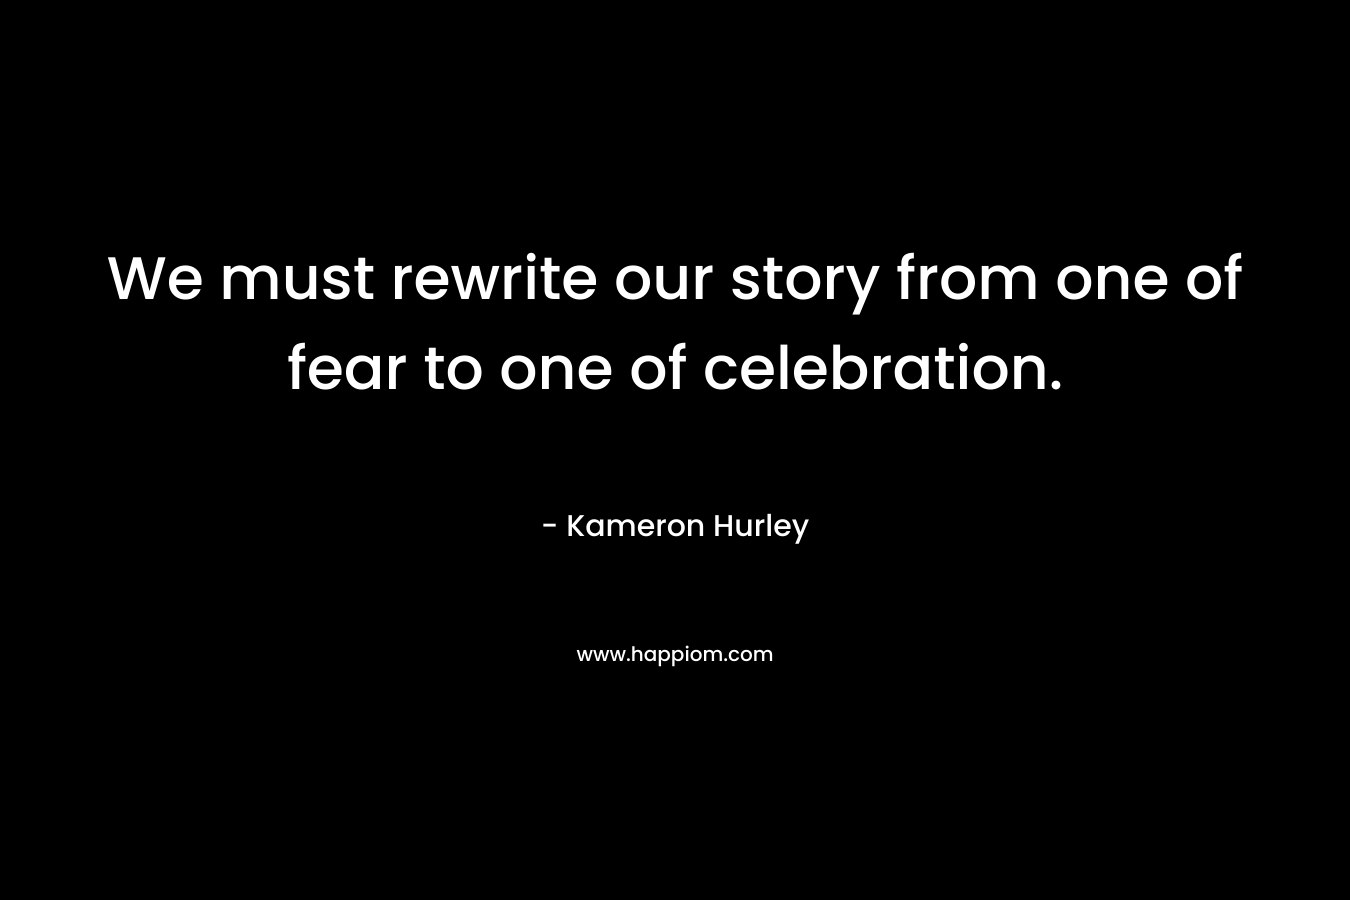 We must rewrite our story from one of fear to one of celebration.